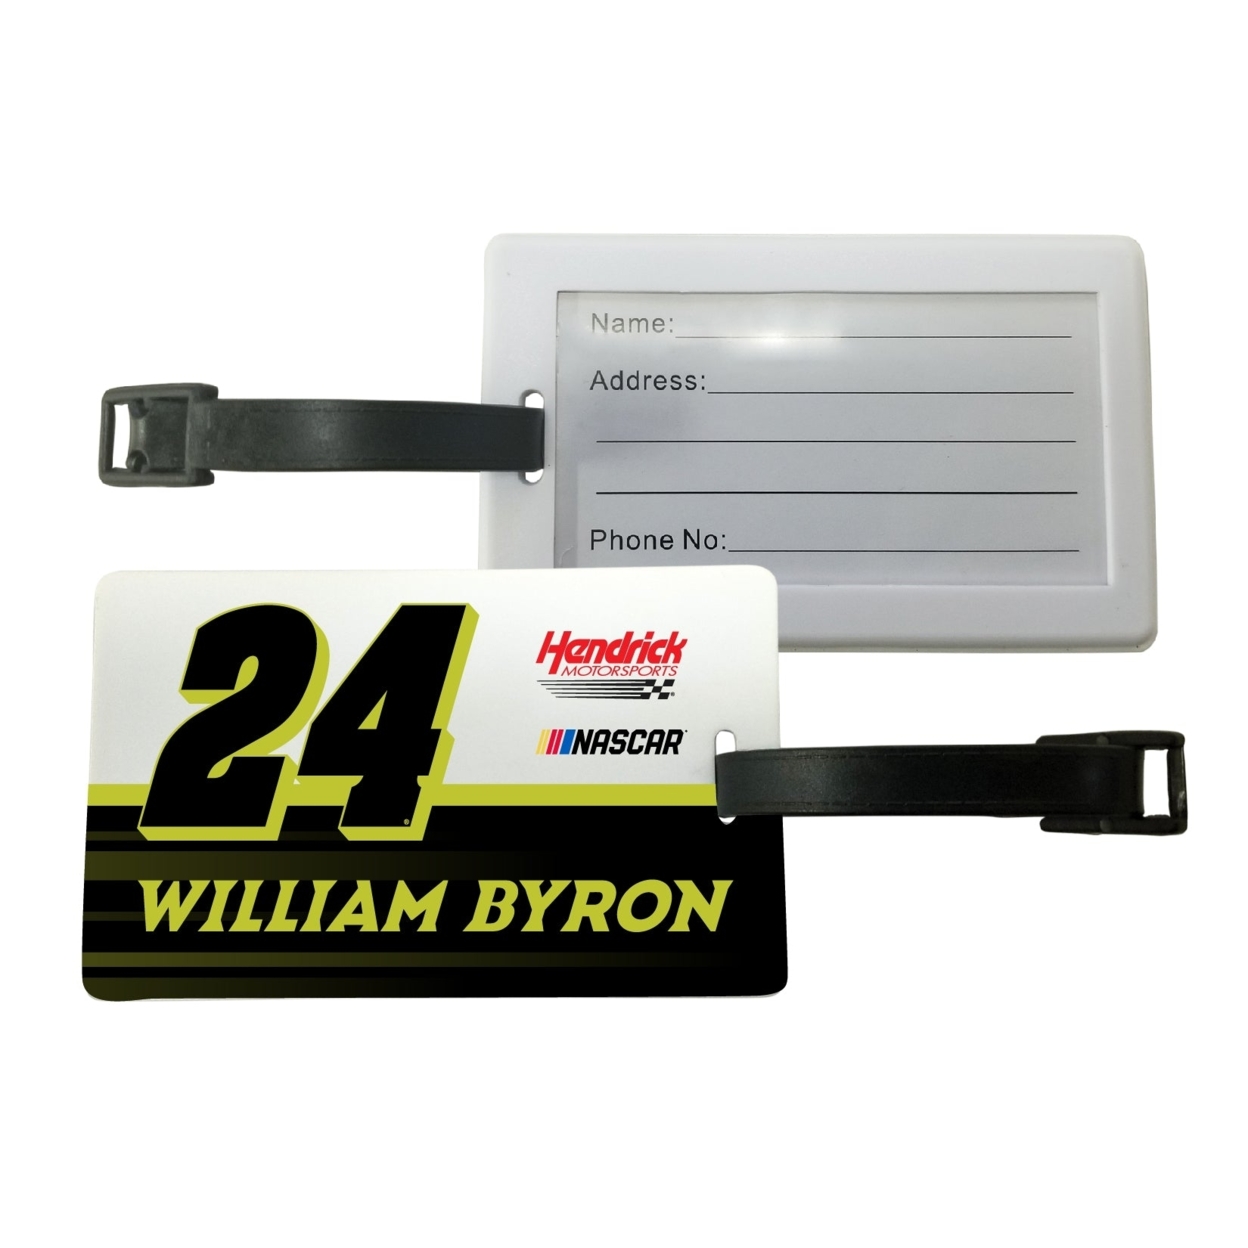 #24 William Byron Officially Licensed Luggage Tag